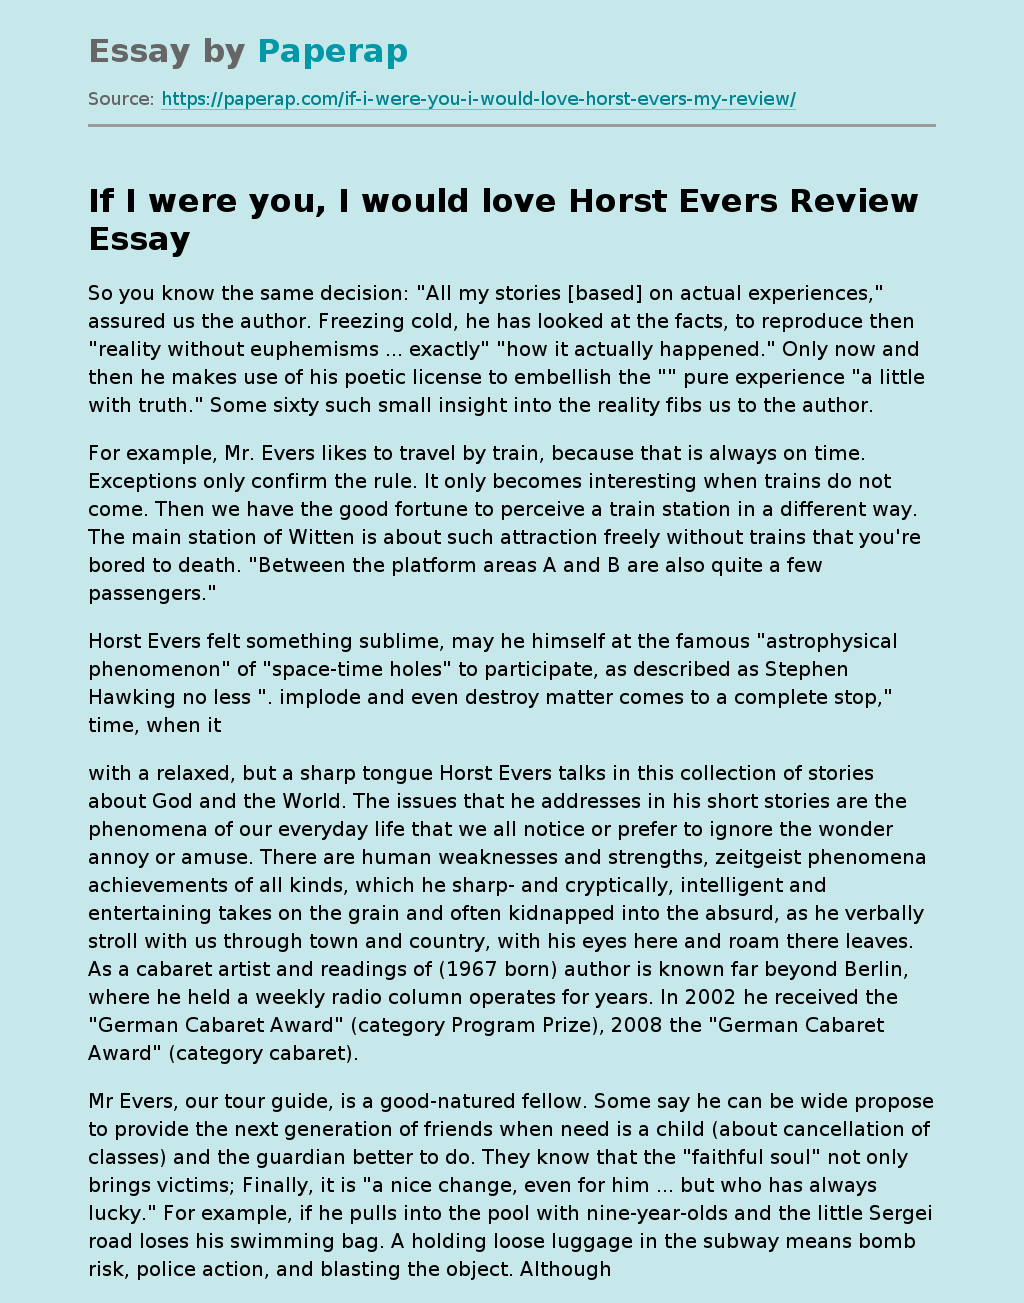 If I were you, I would love Horst Evers Review